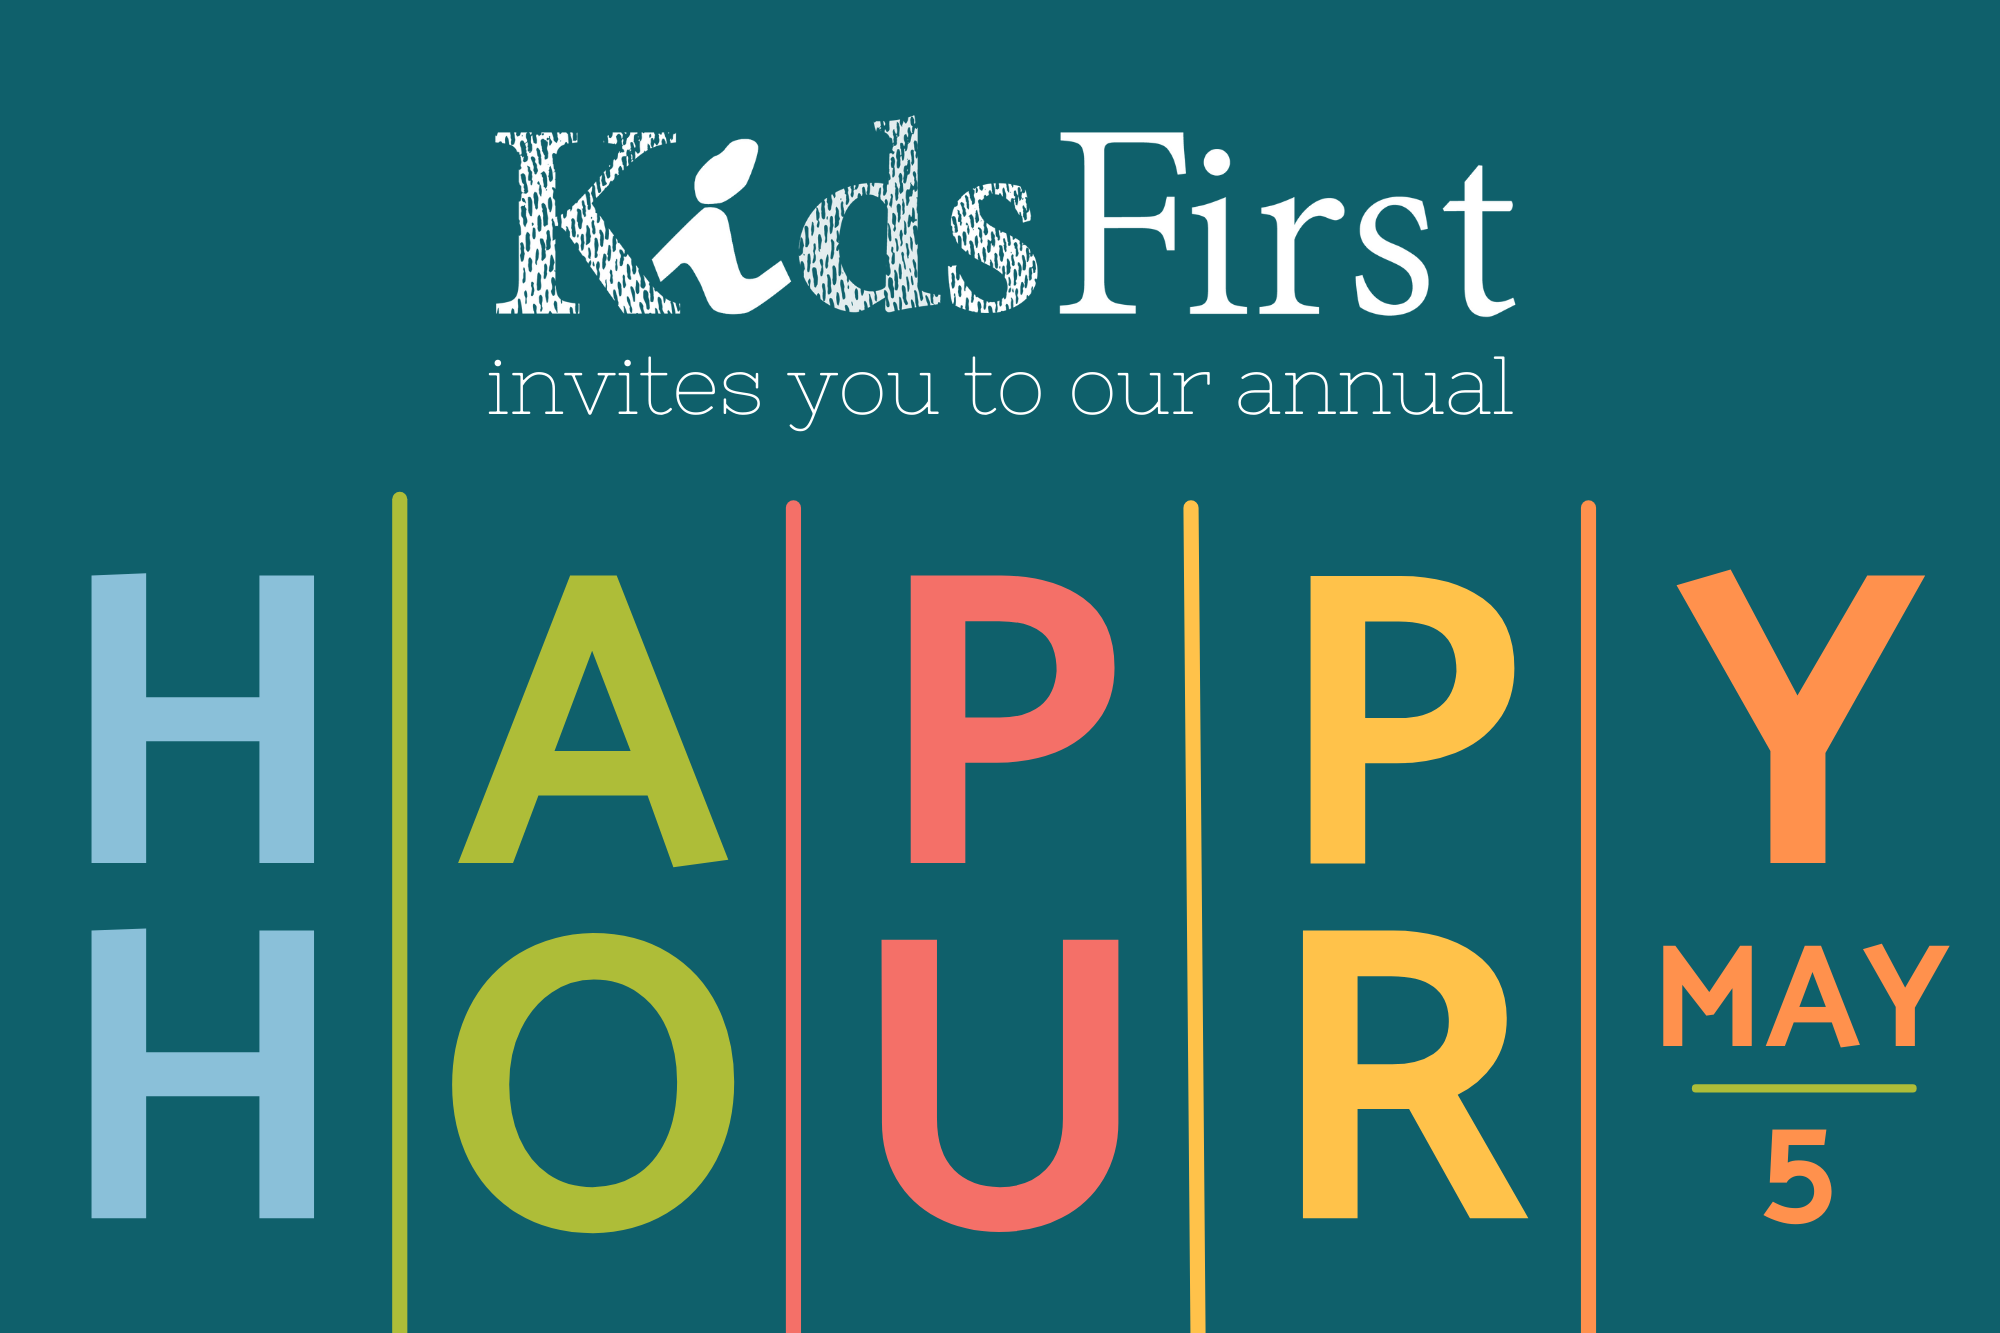 Happy Hour for Kids First is May 5th